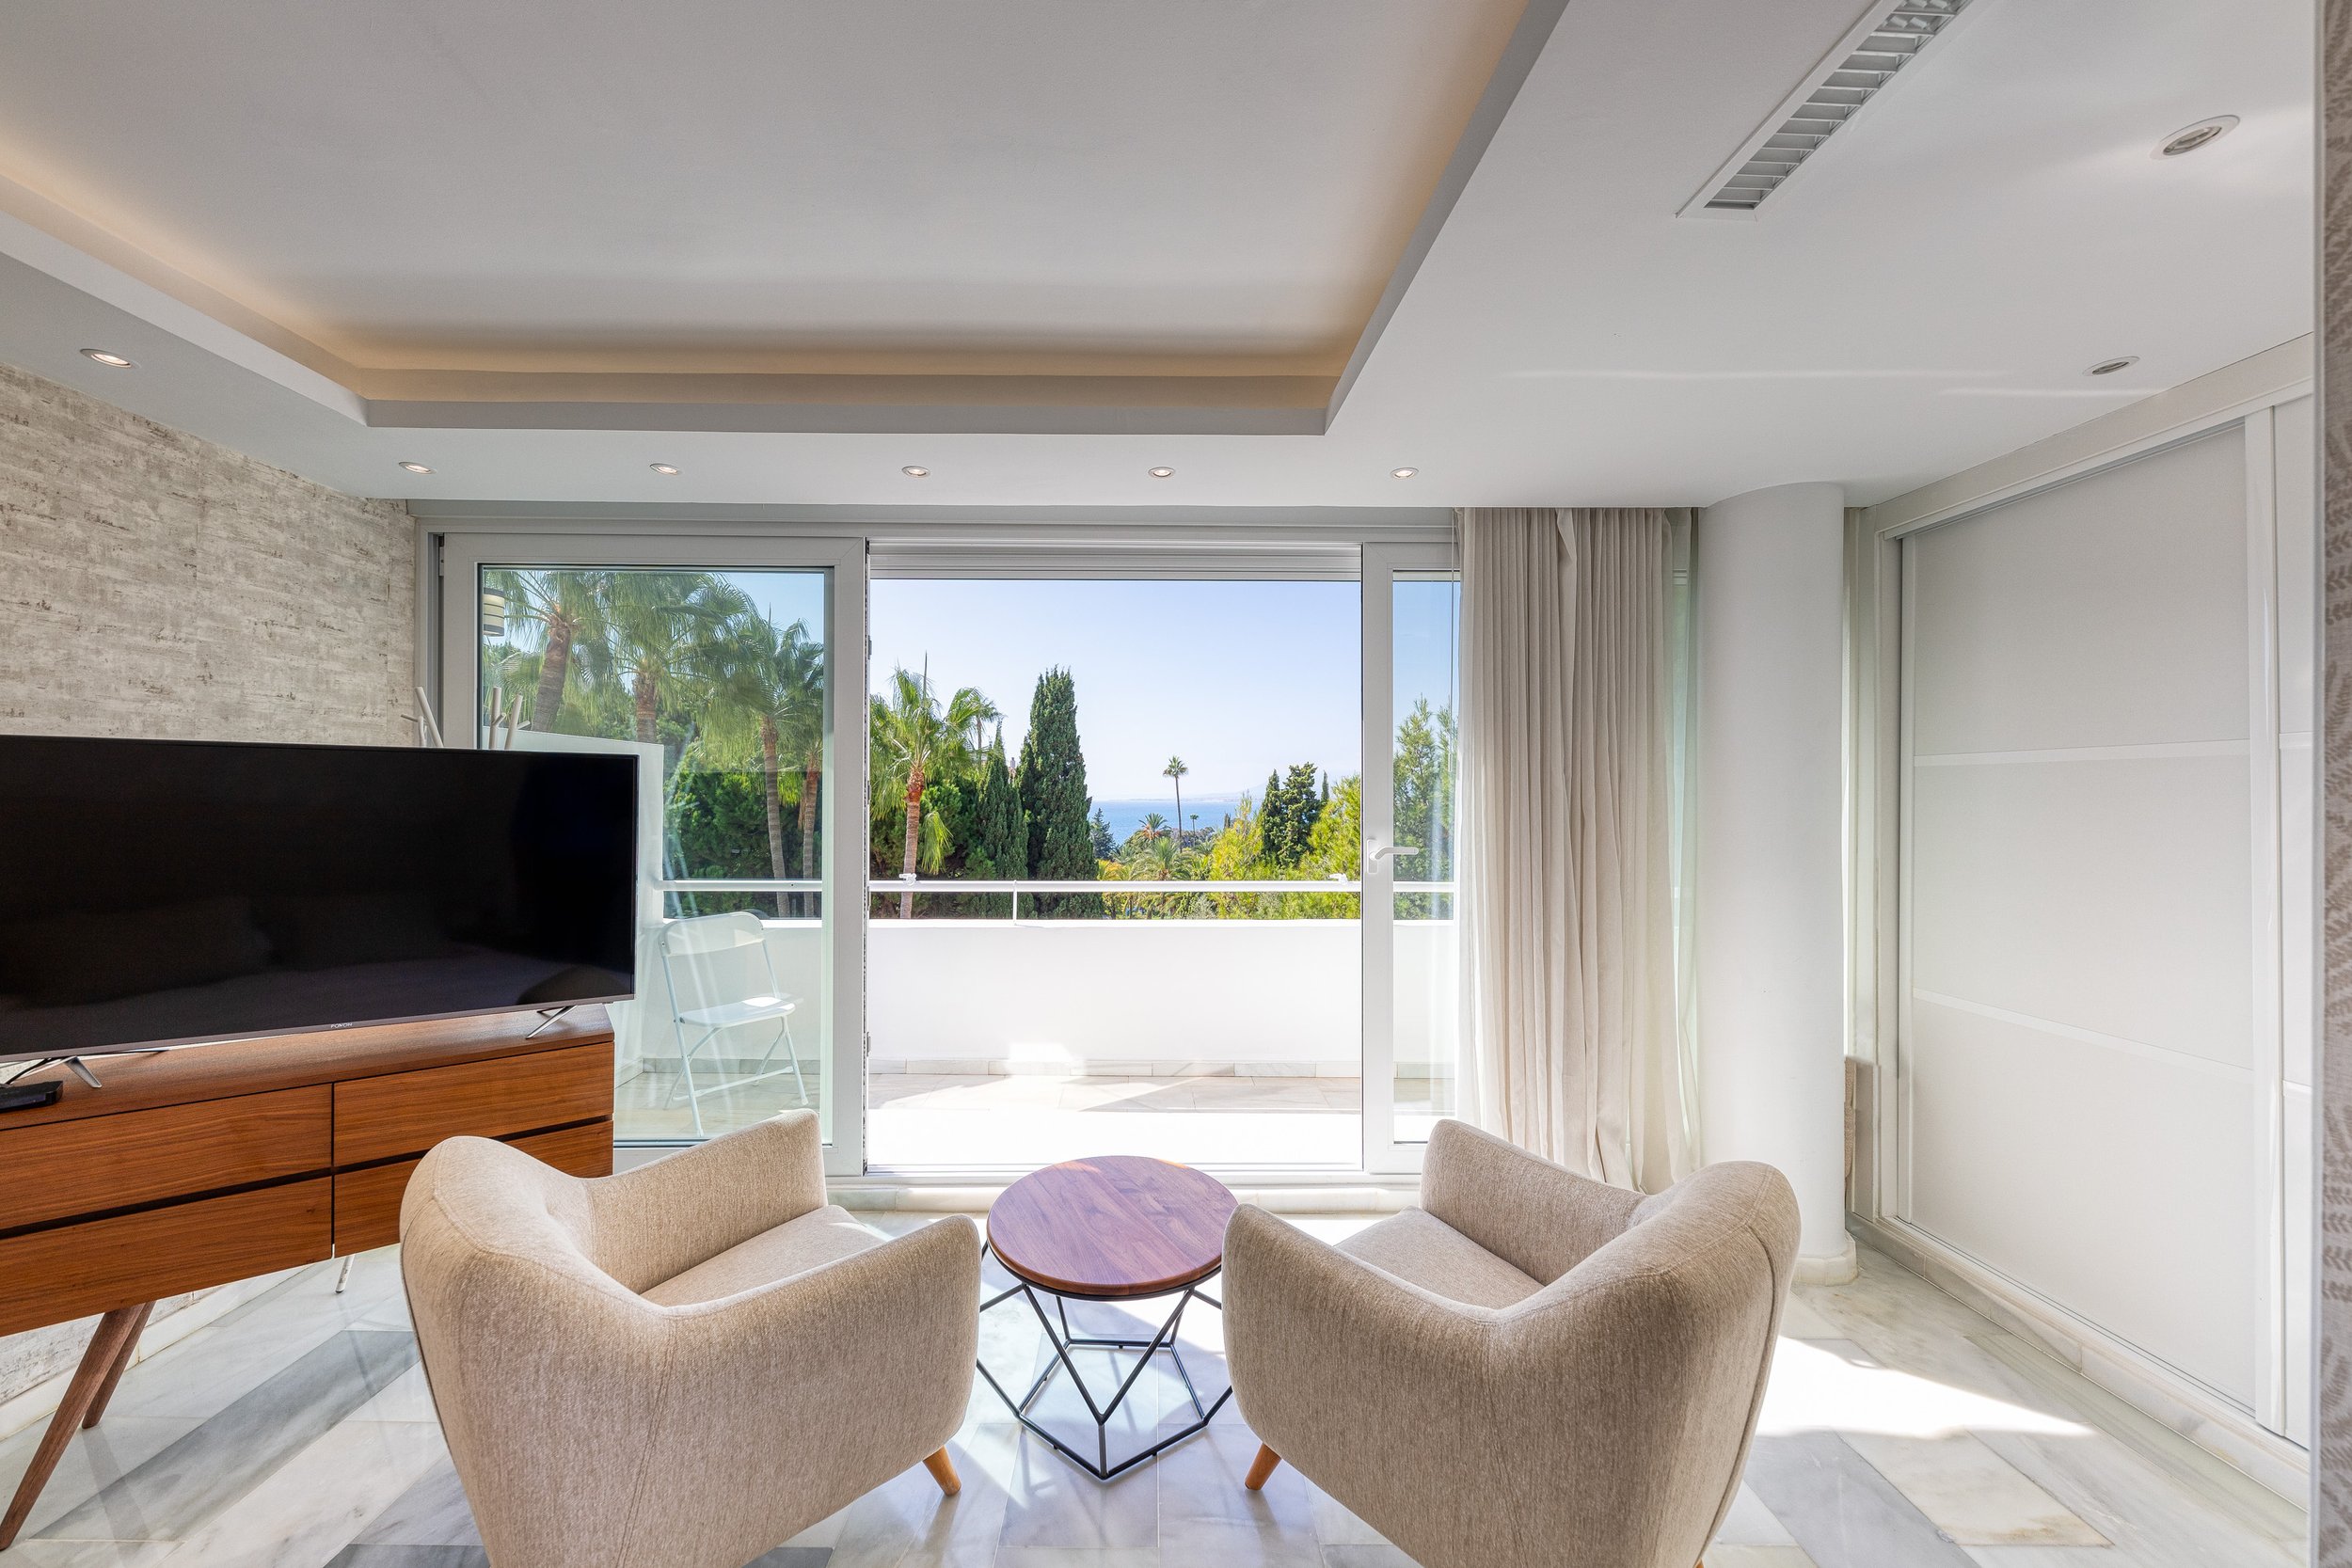 for-sale-renovated-three-bedroom-duplex-penthouse-rio-real-marbella-fs8795-13.jpg